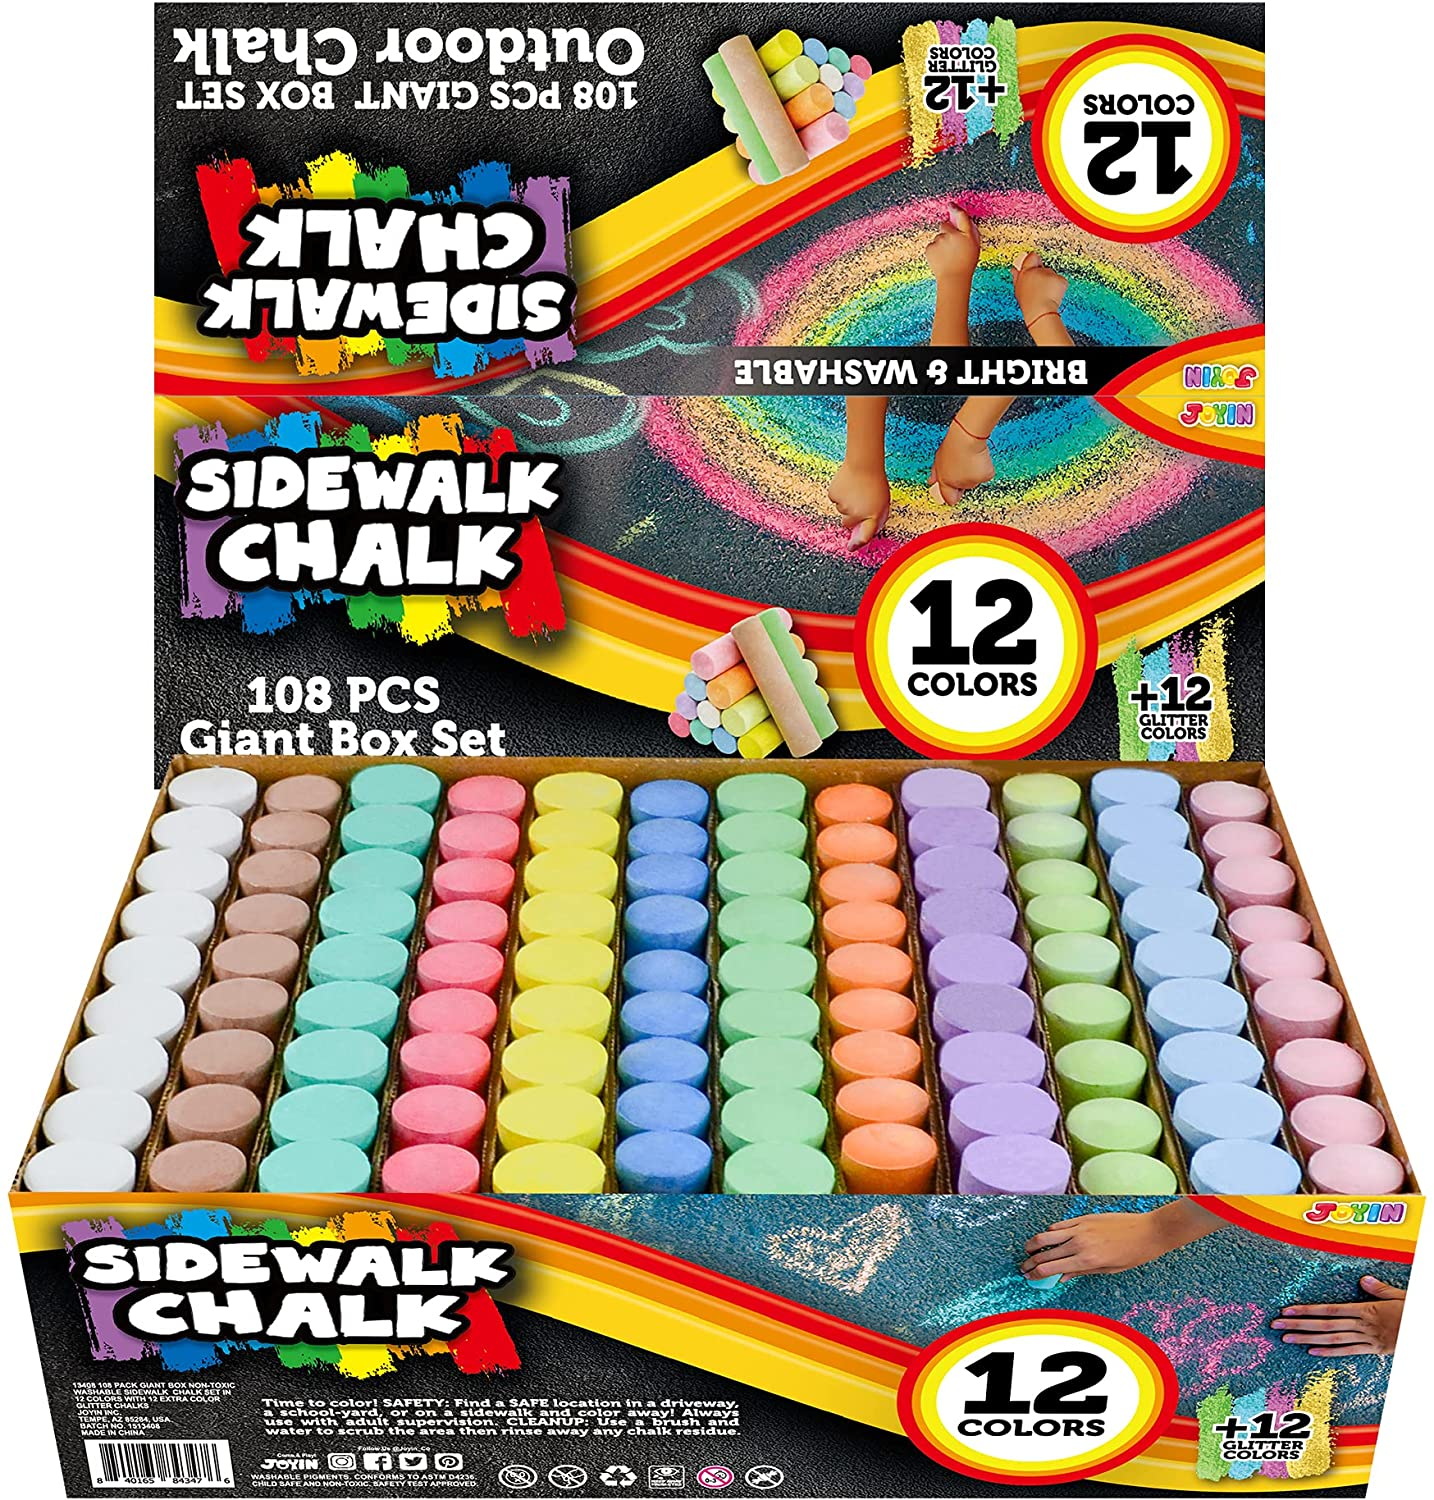 108 PCS Jumbo Sidewalk Chalk Set in 12 Color Including 12 Glitter Chalks, Non-Toxic Washable Sidewalk Chalks for Outdoor Art Play, Painting on Chalkboard, Blackboard and Playground